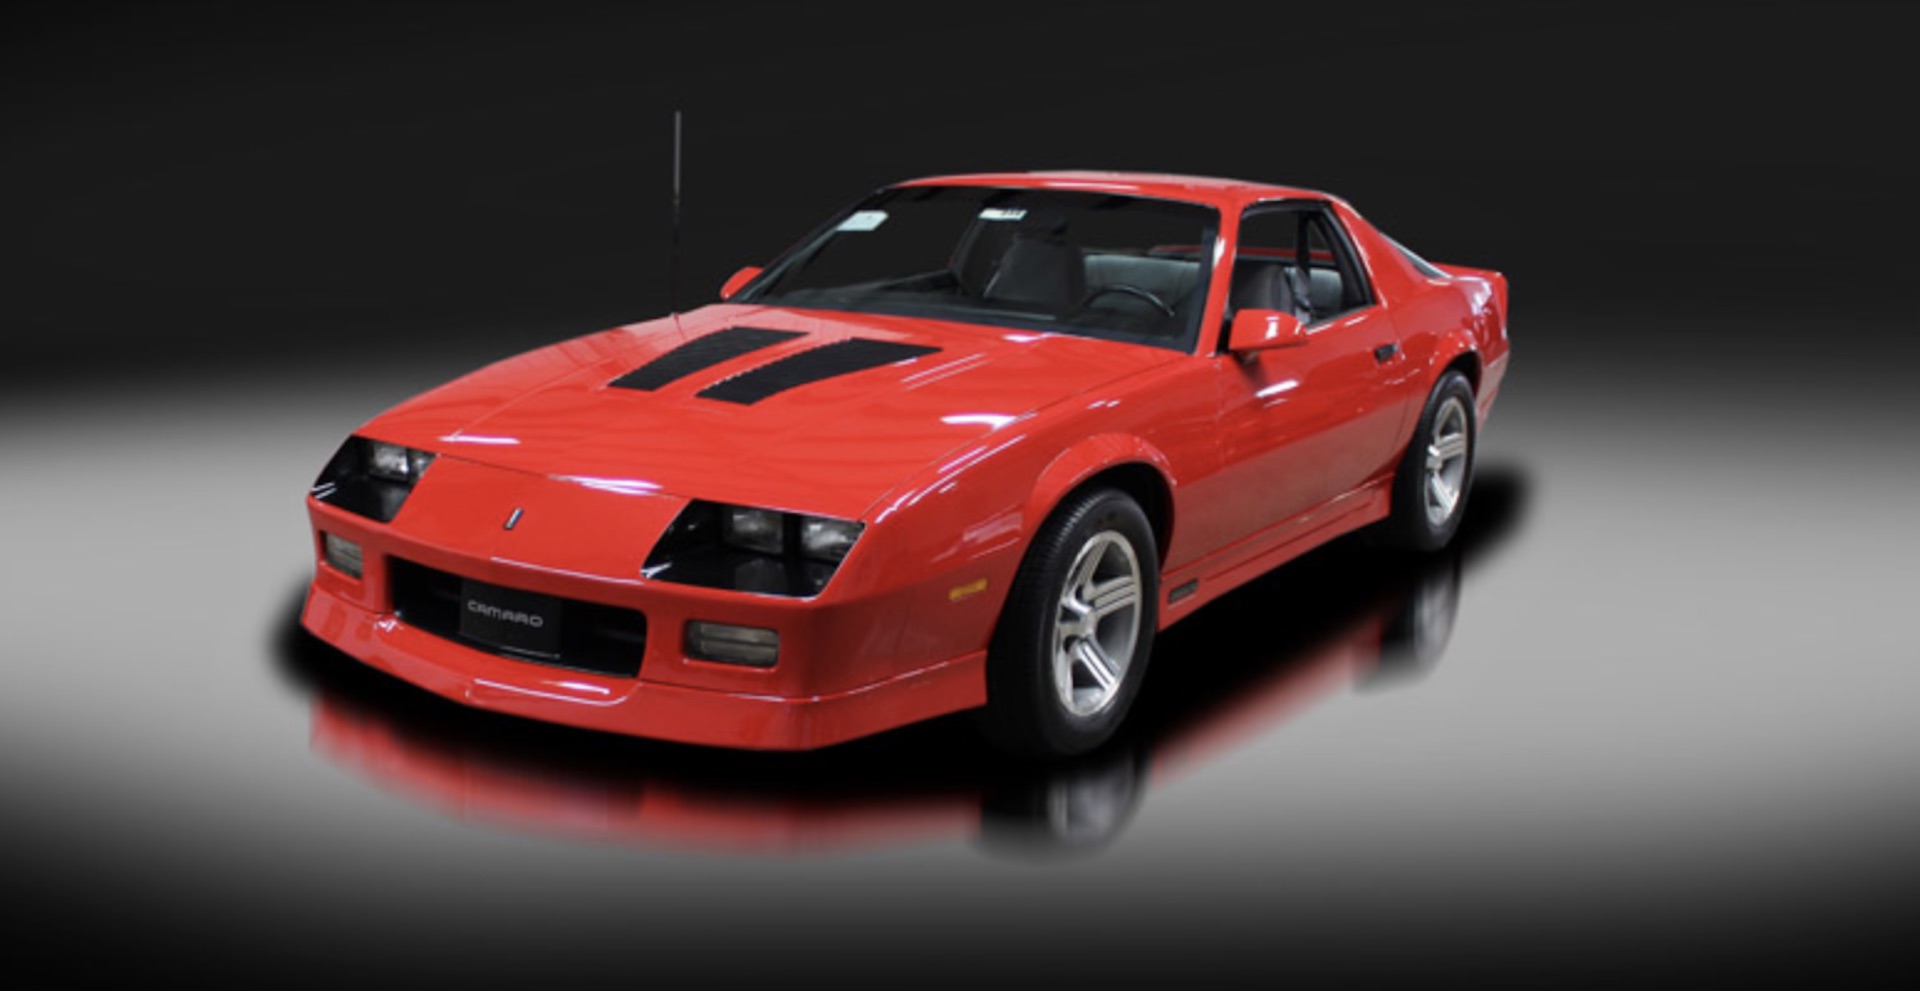 1990 Chevy Camaro IROC-Z 1LE For Sale | GM Authority